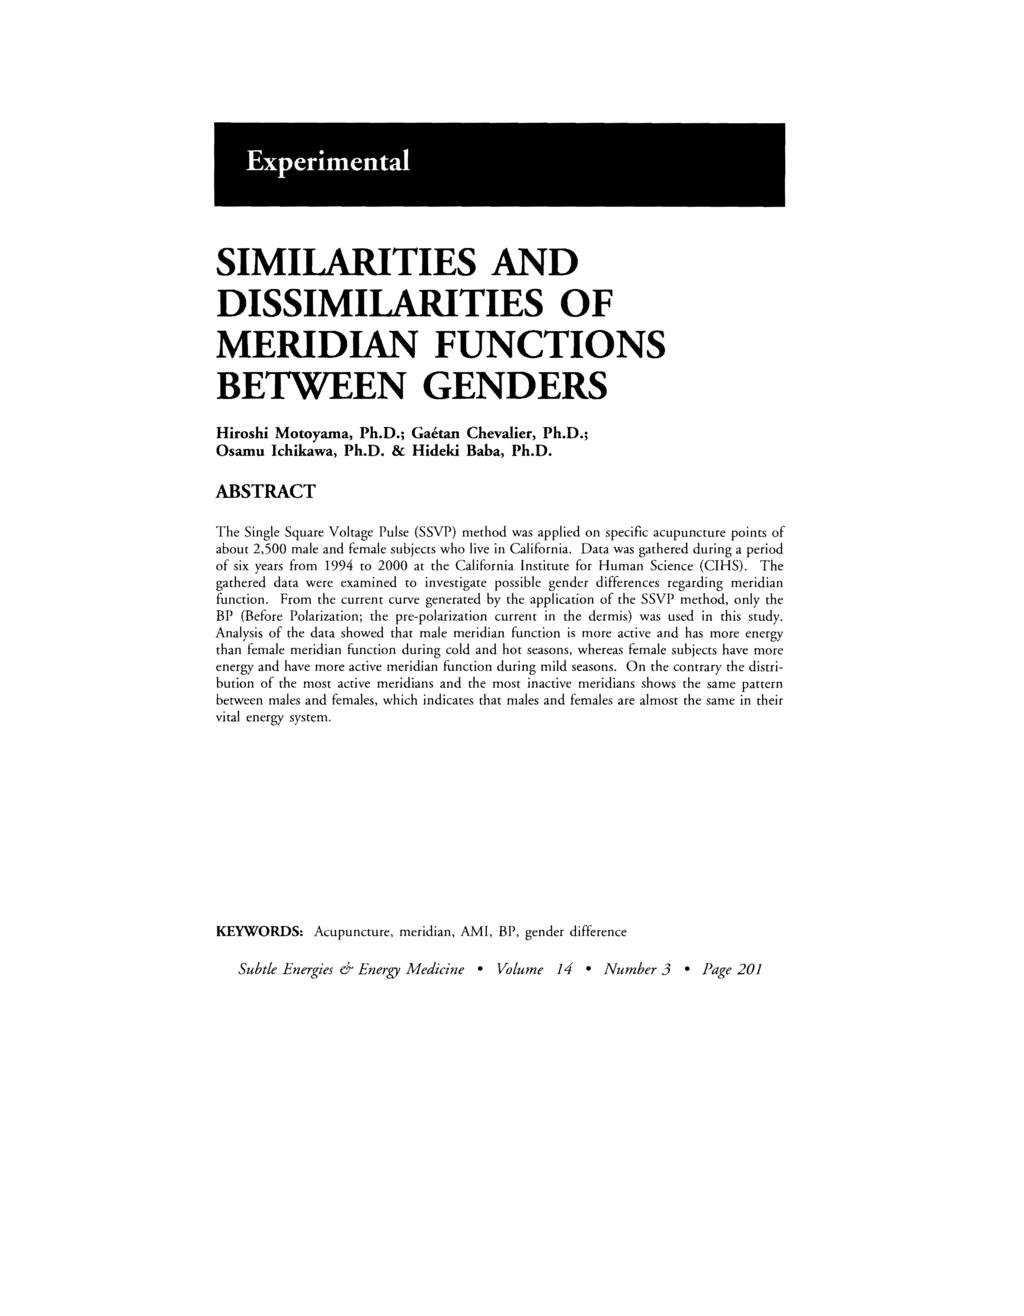 Experimental SIMILARITIES AND DISSIMILARITIES OF MERIDIAN FUNCTIONS BETWEEN GENDERS Hiroshi Motoyama, Ph.D.; Gaetan Chevalier, Ph.D.; Osamu Ichikawa, Ph.D. & Hideki Baba, Ph.D. ABSTRACT The Single Square Voltage Pulse (SSVP) method was applied on specific acupuncture points of about,5 male and female subjects who live in California.